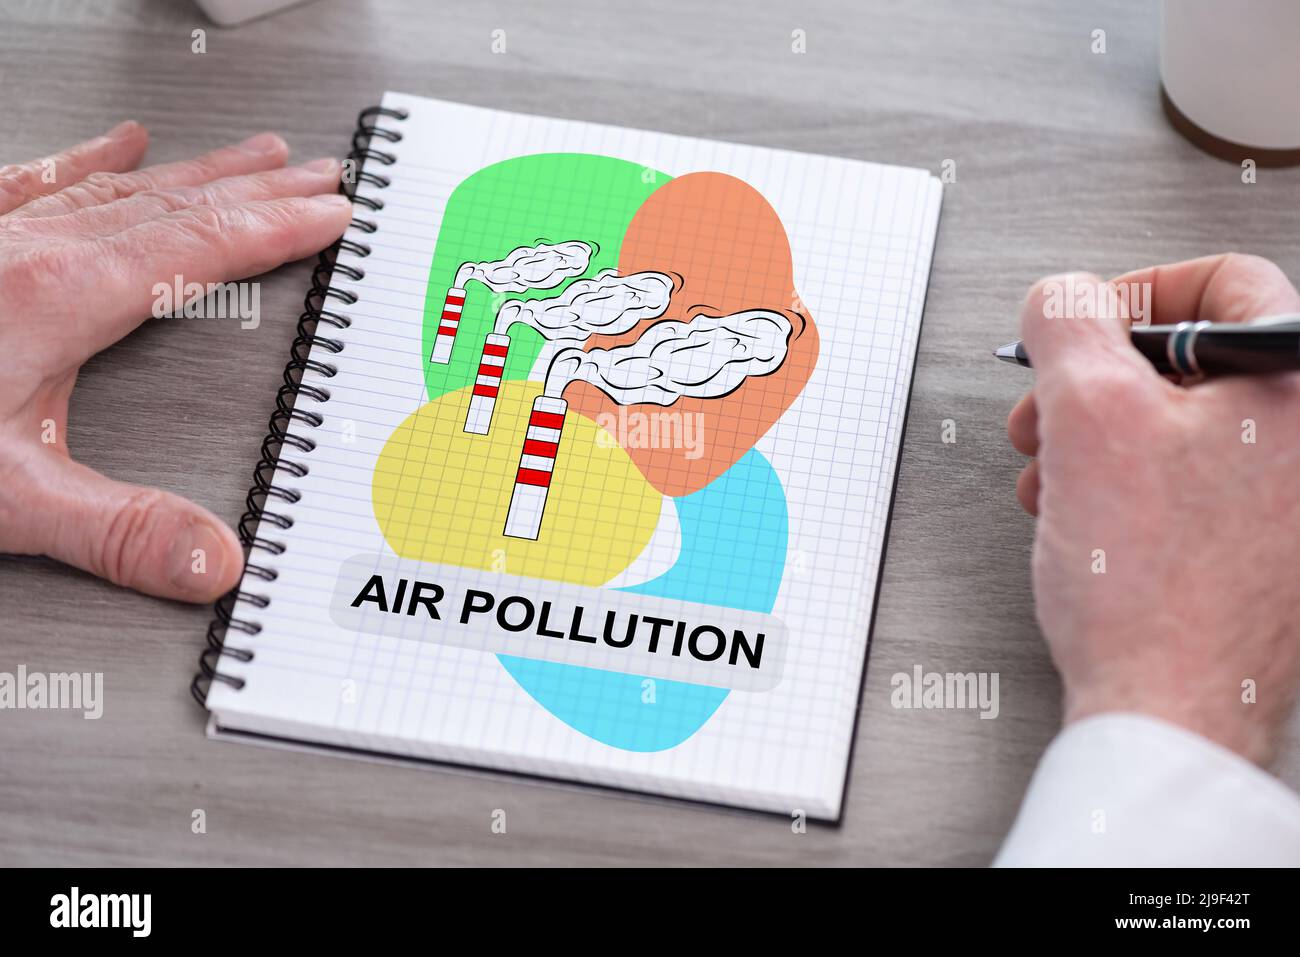 Poster Design For Stop Pollution With Girl Wearing Mask Stock Illustration  - Download Image Now - iStock